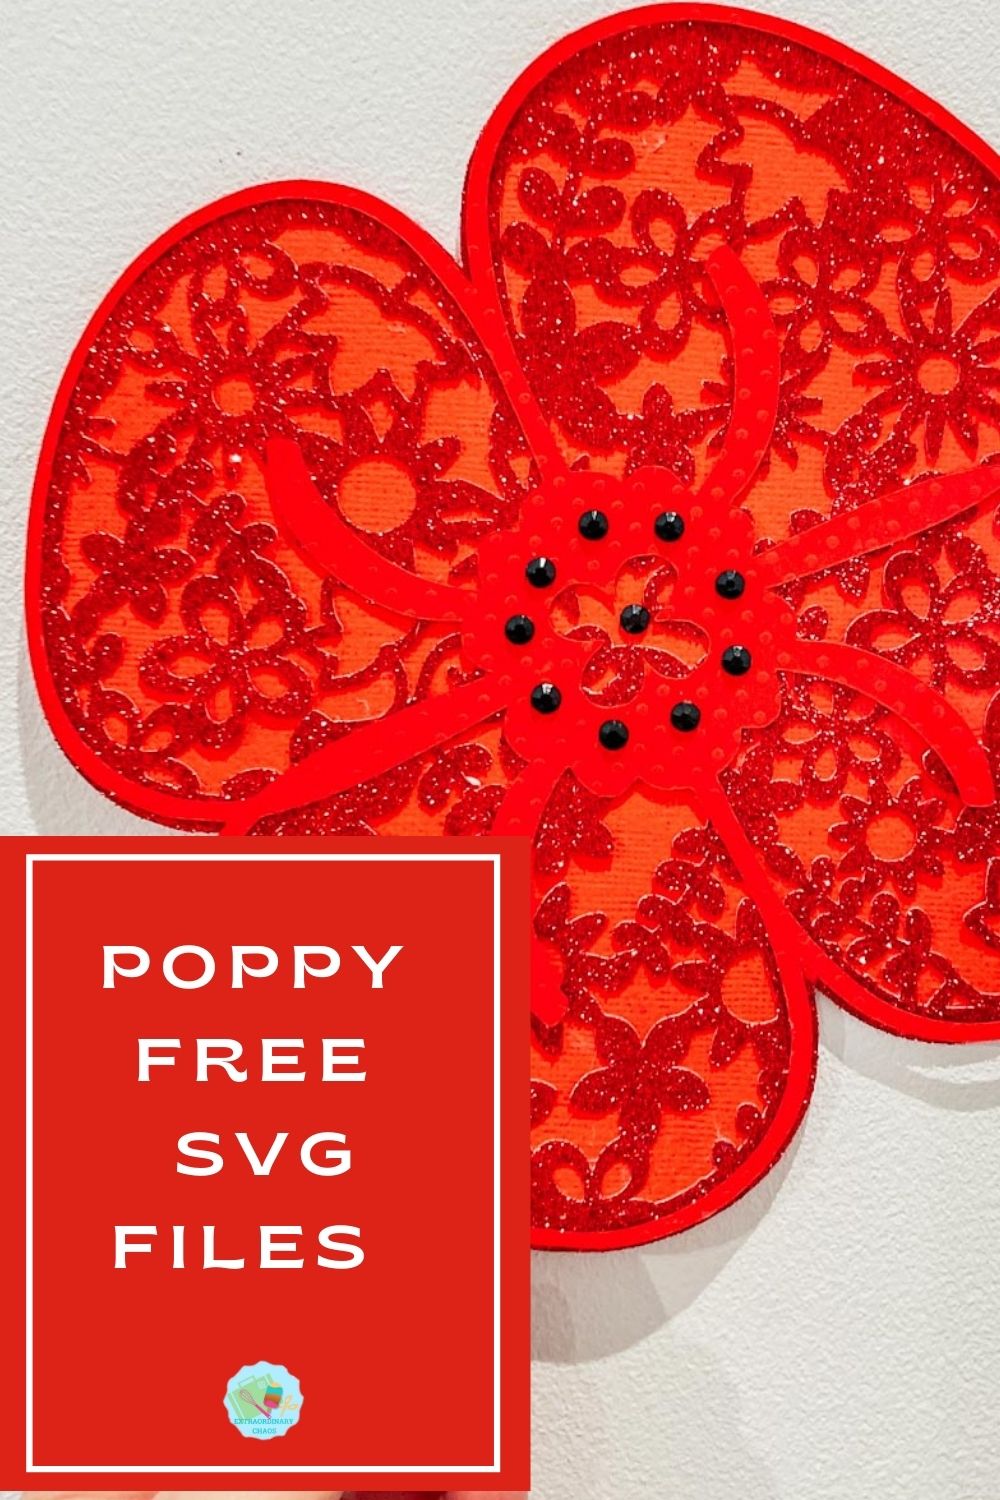 Poppy Free SVG, PNG files for Crafting with Cricut or Silhouette -2